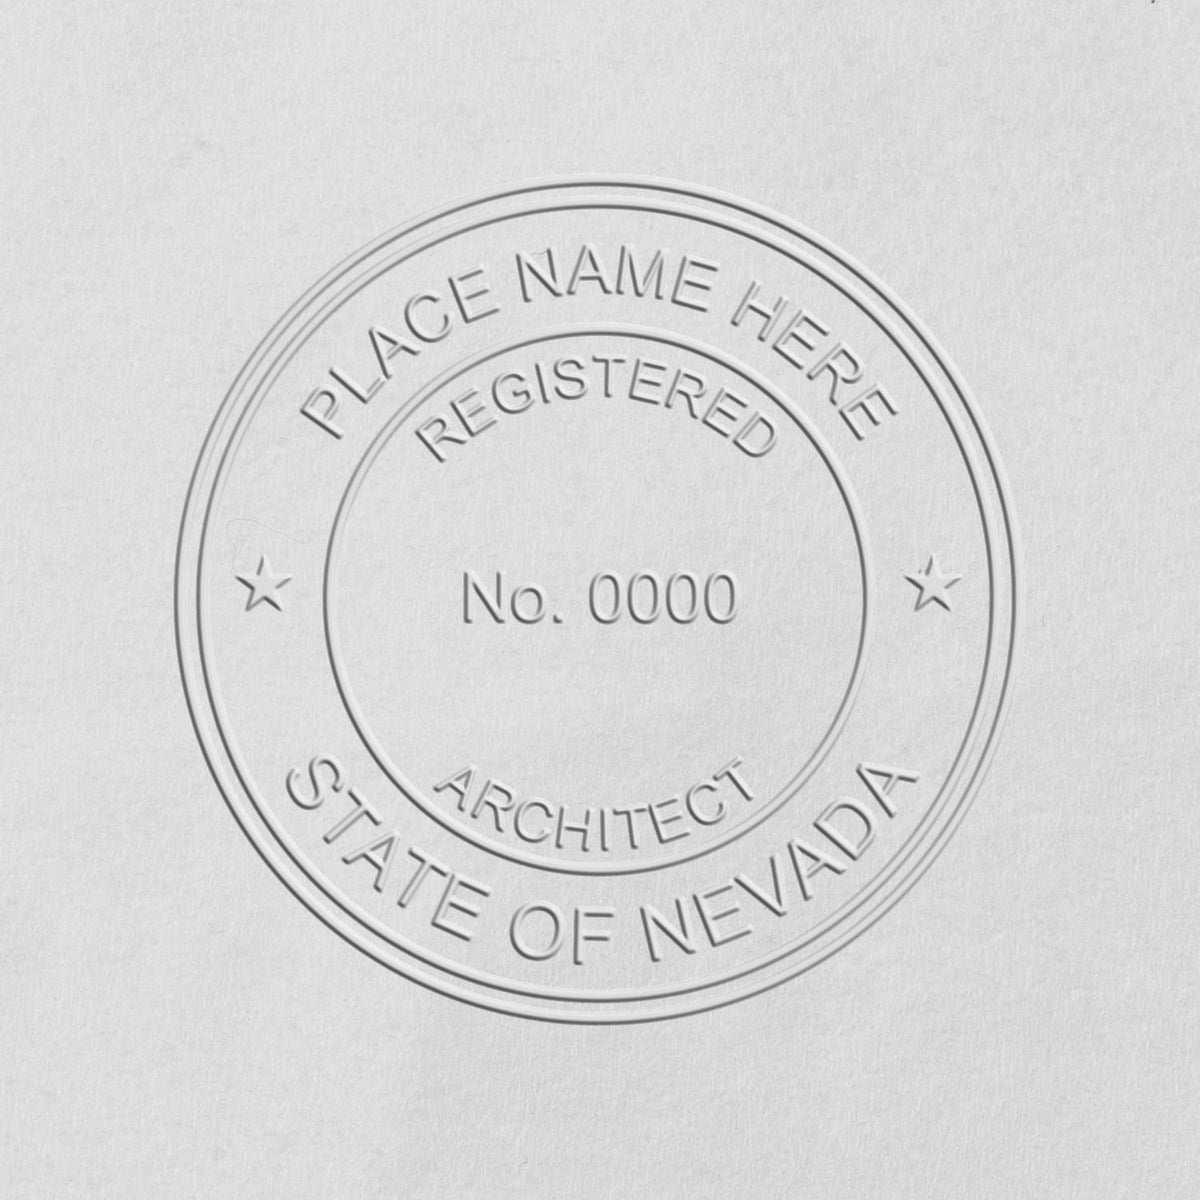 The State of Nevada Architectural Seal Embosser stamp impression comes to life with a crisp, detailed photo on paper - showcasing true professional quality.